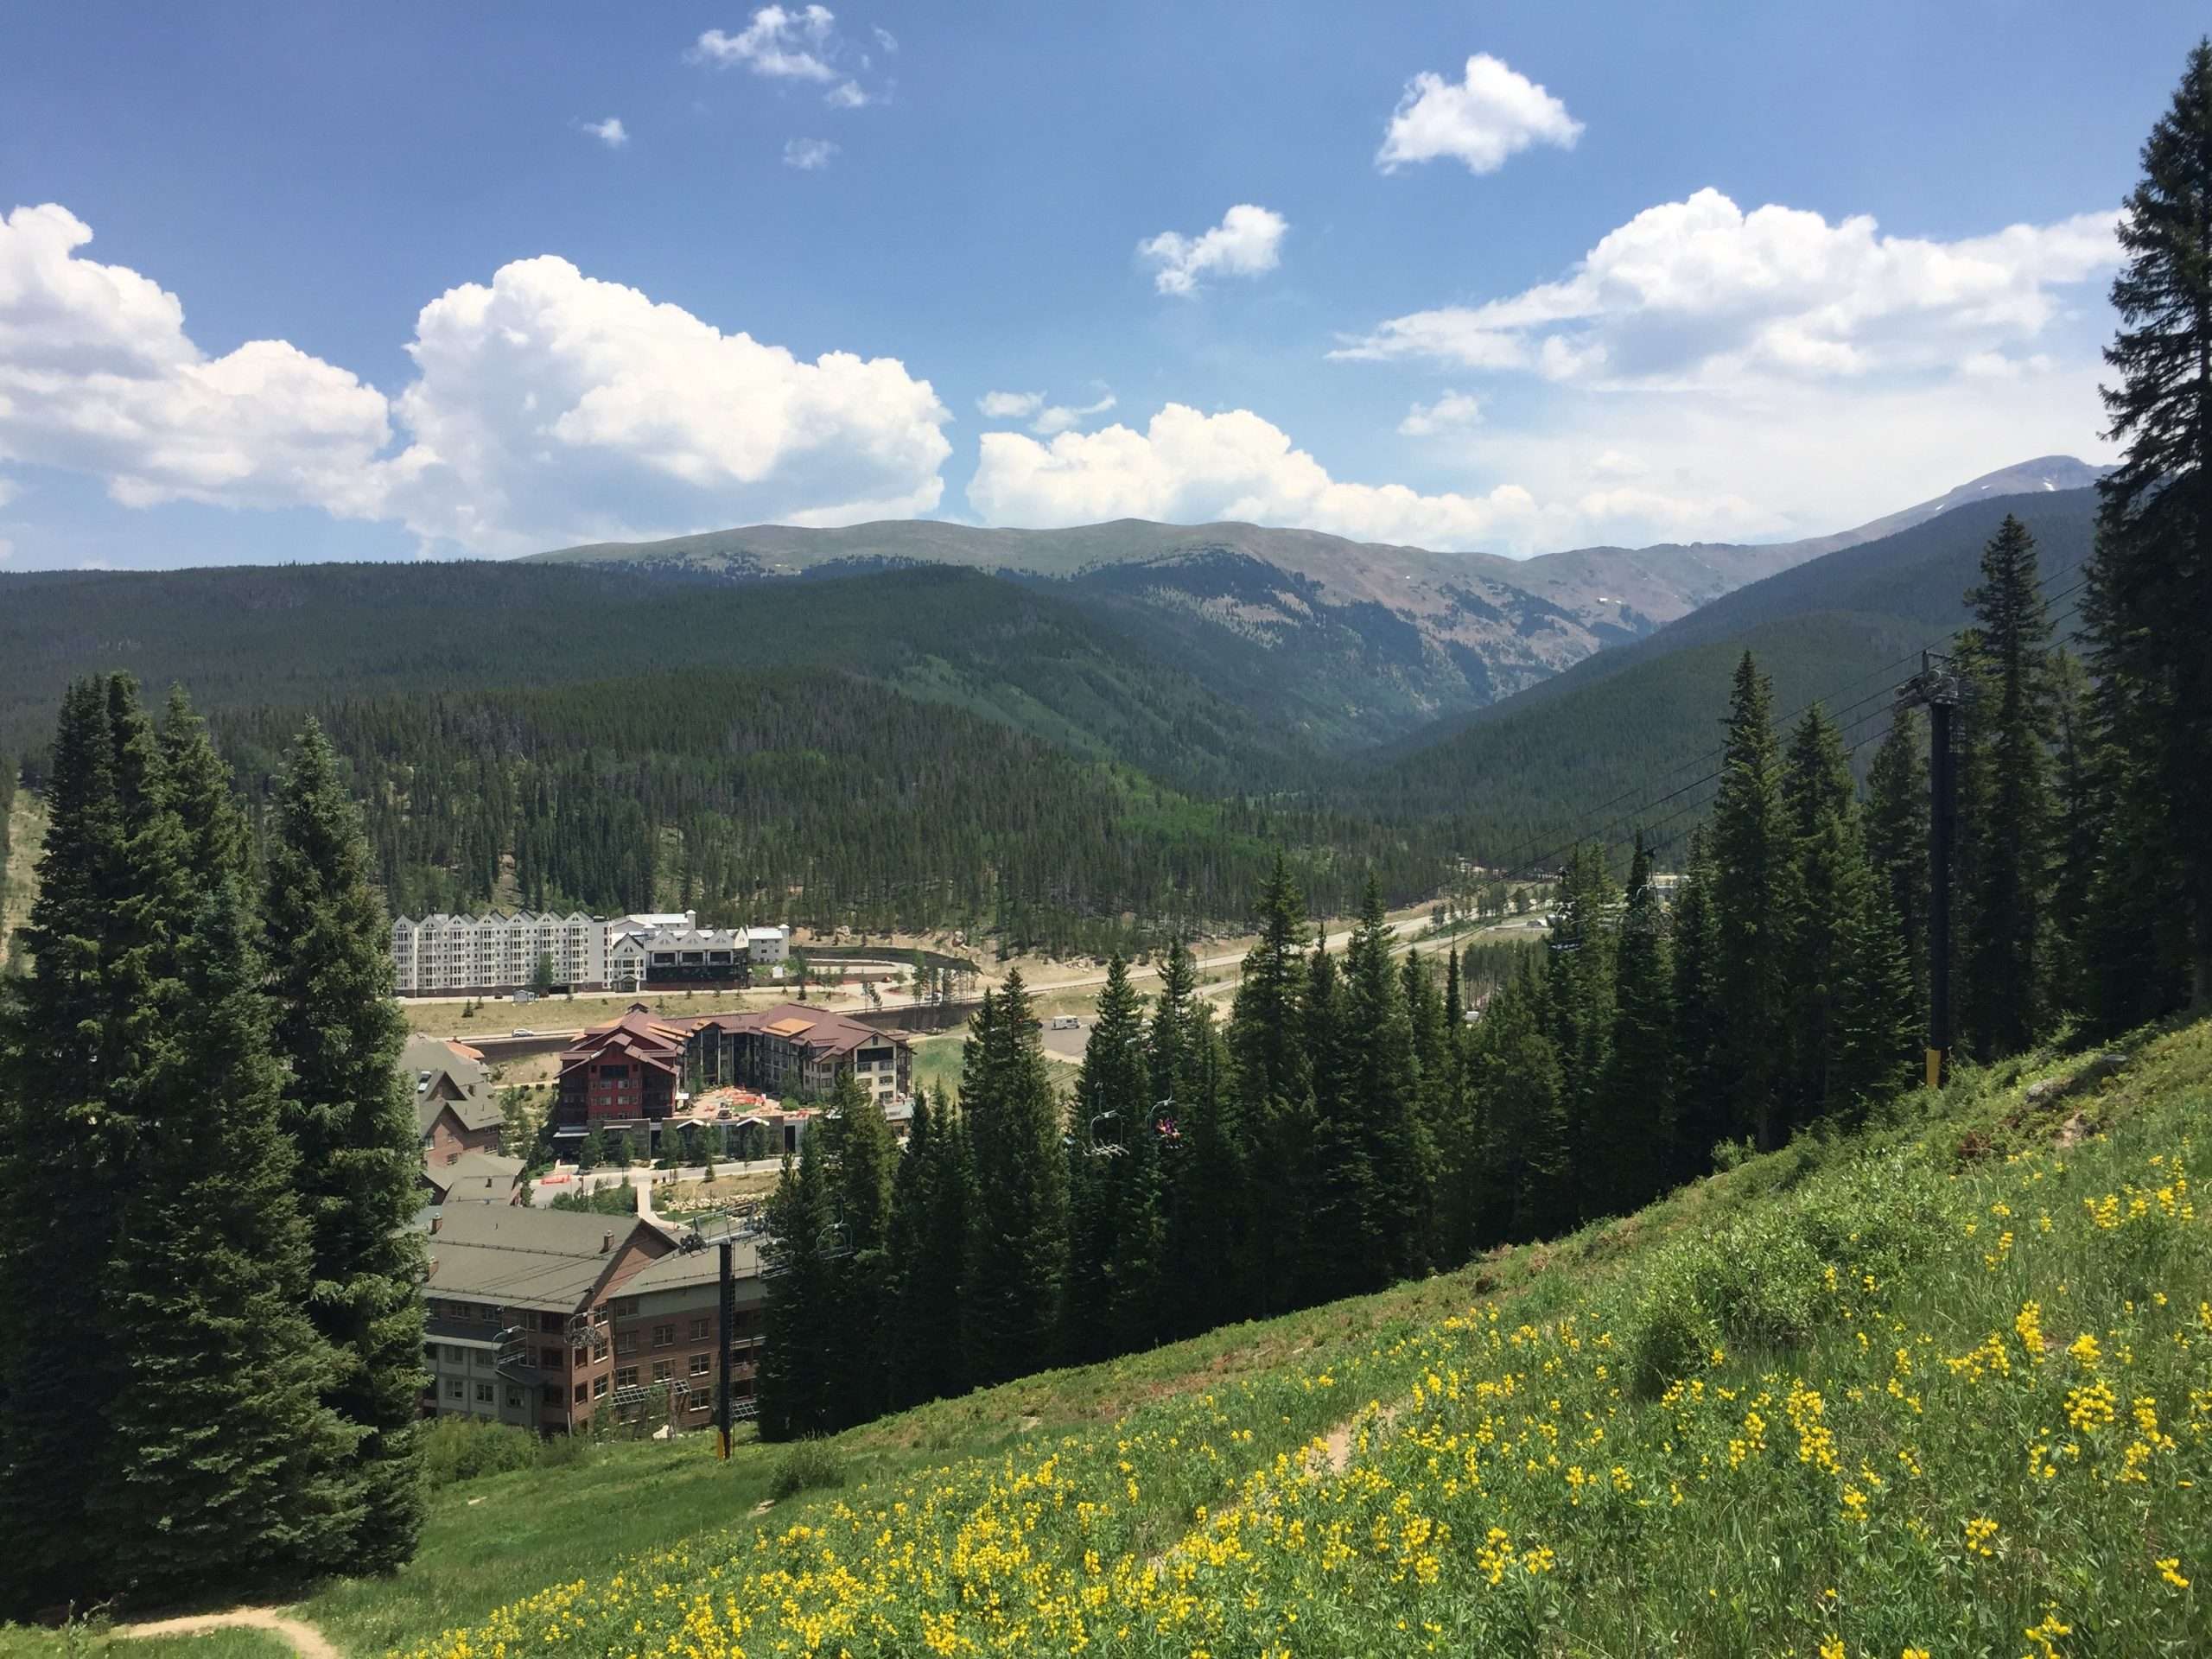 Photograph of Winter Park, Colorado in the summer